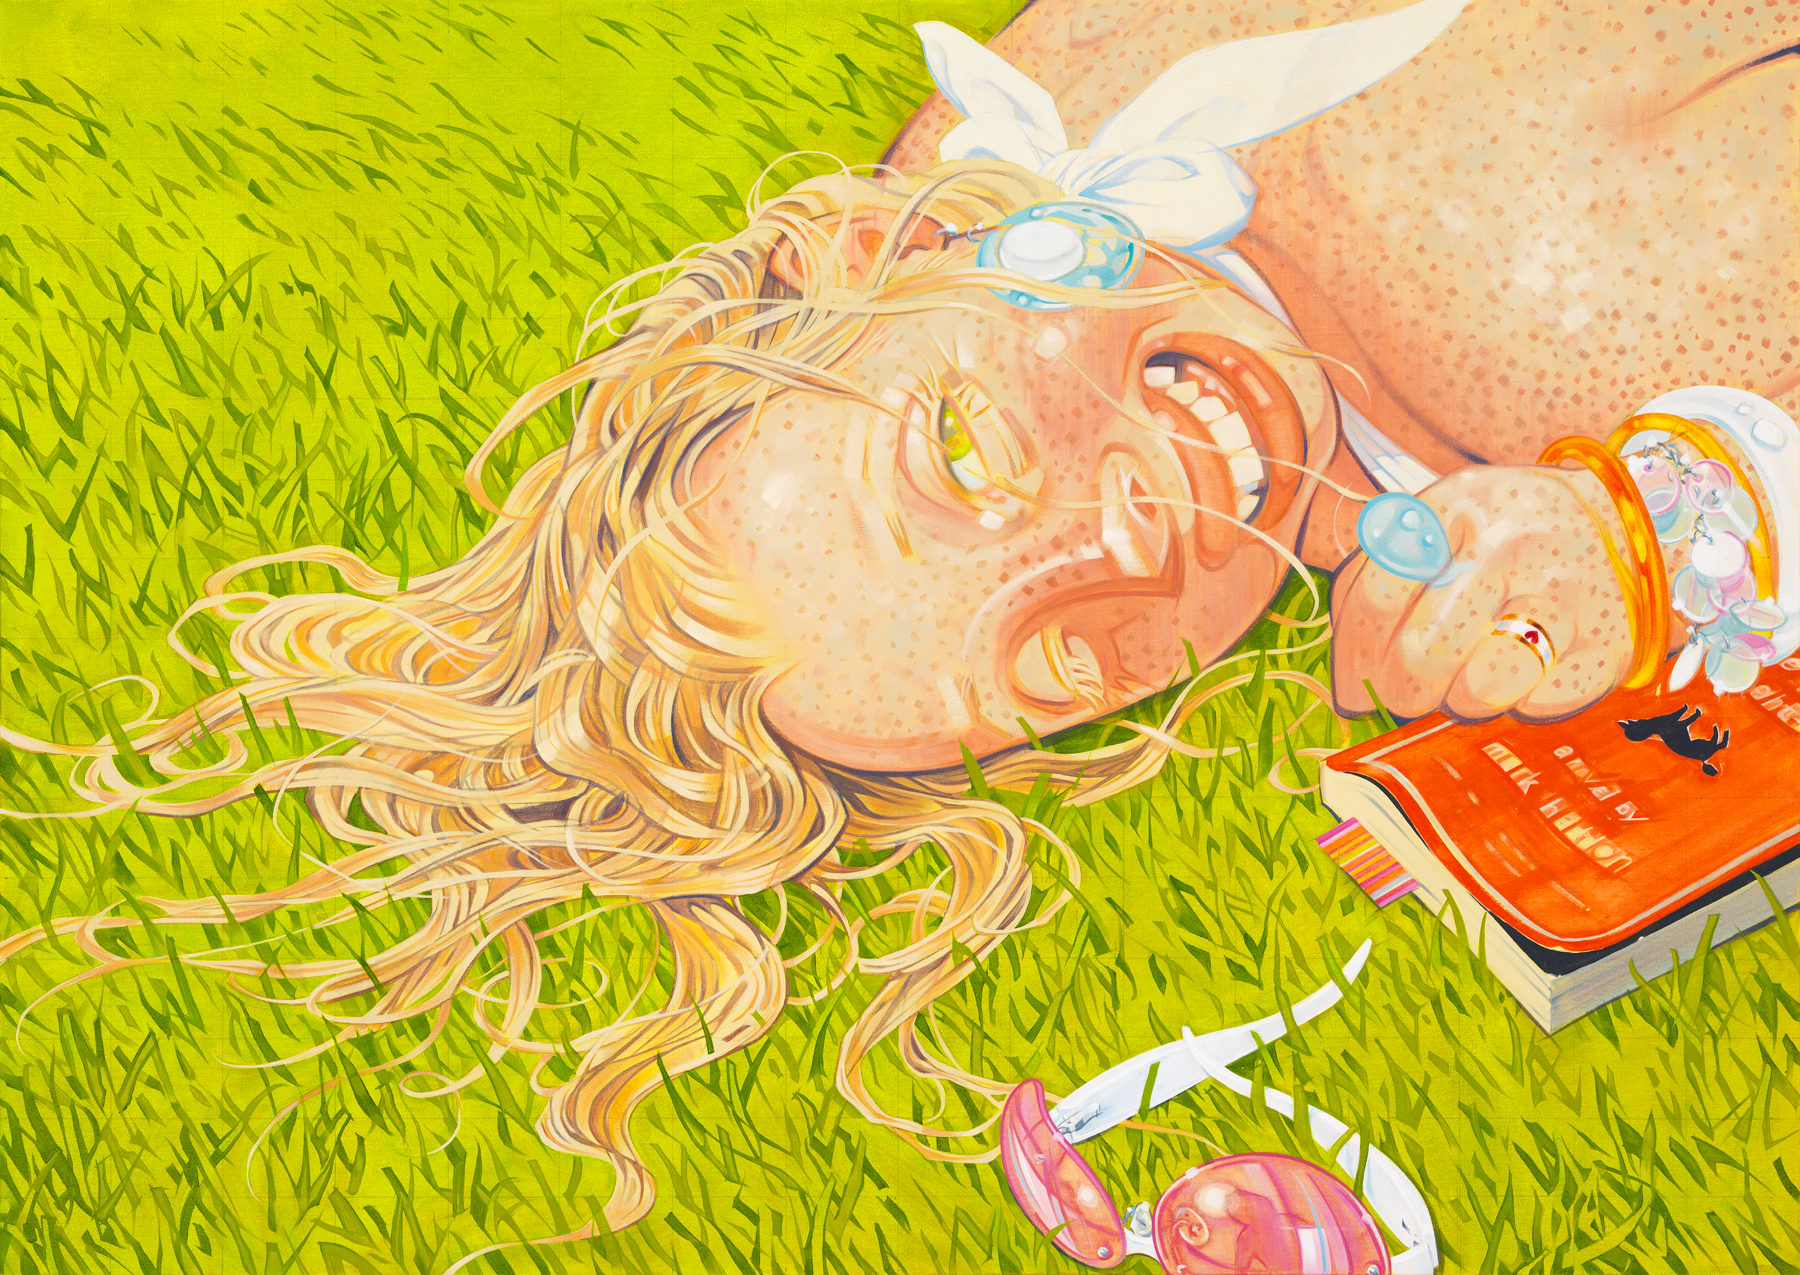 The Last Days of Summer, 2007, under contract, oil on canvas, 34 x 48 inches, by Taiyo la Paix